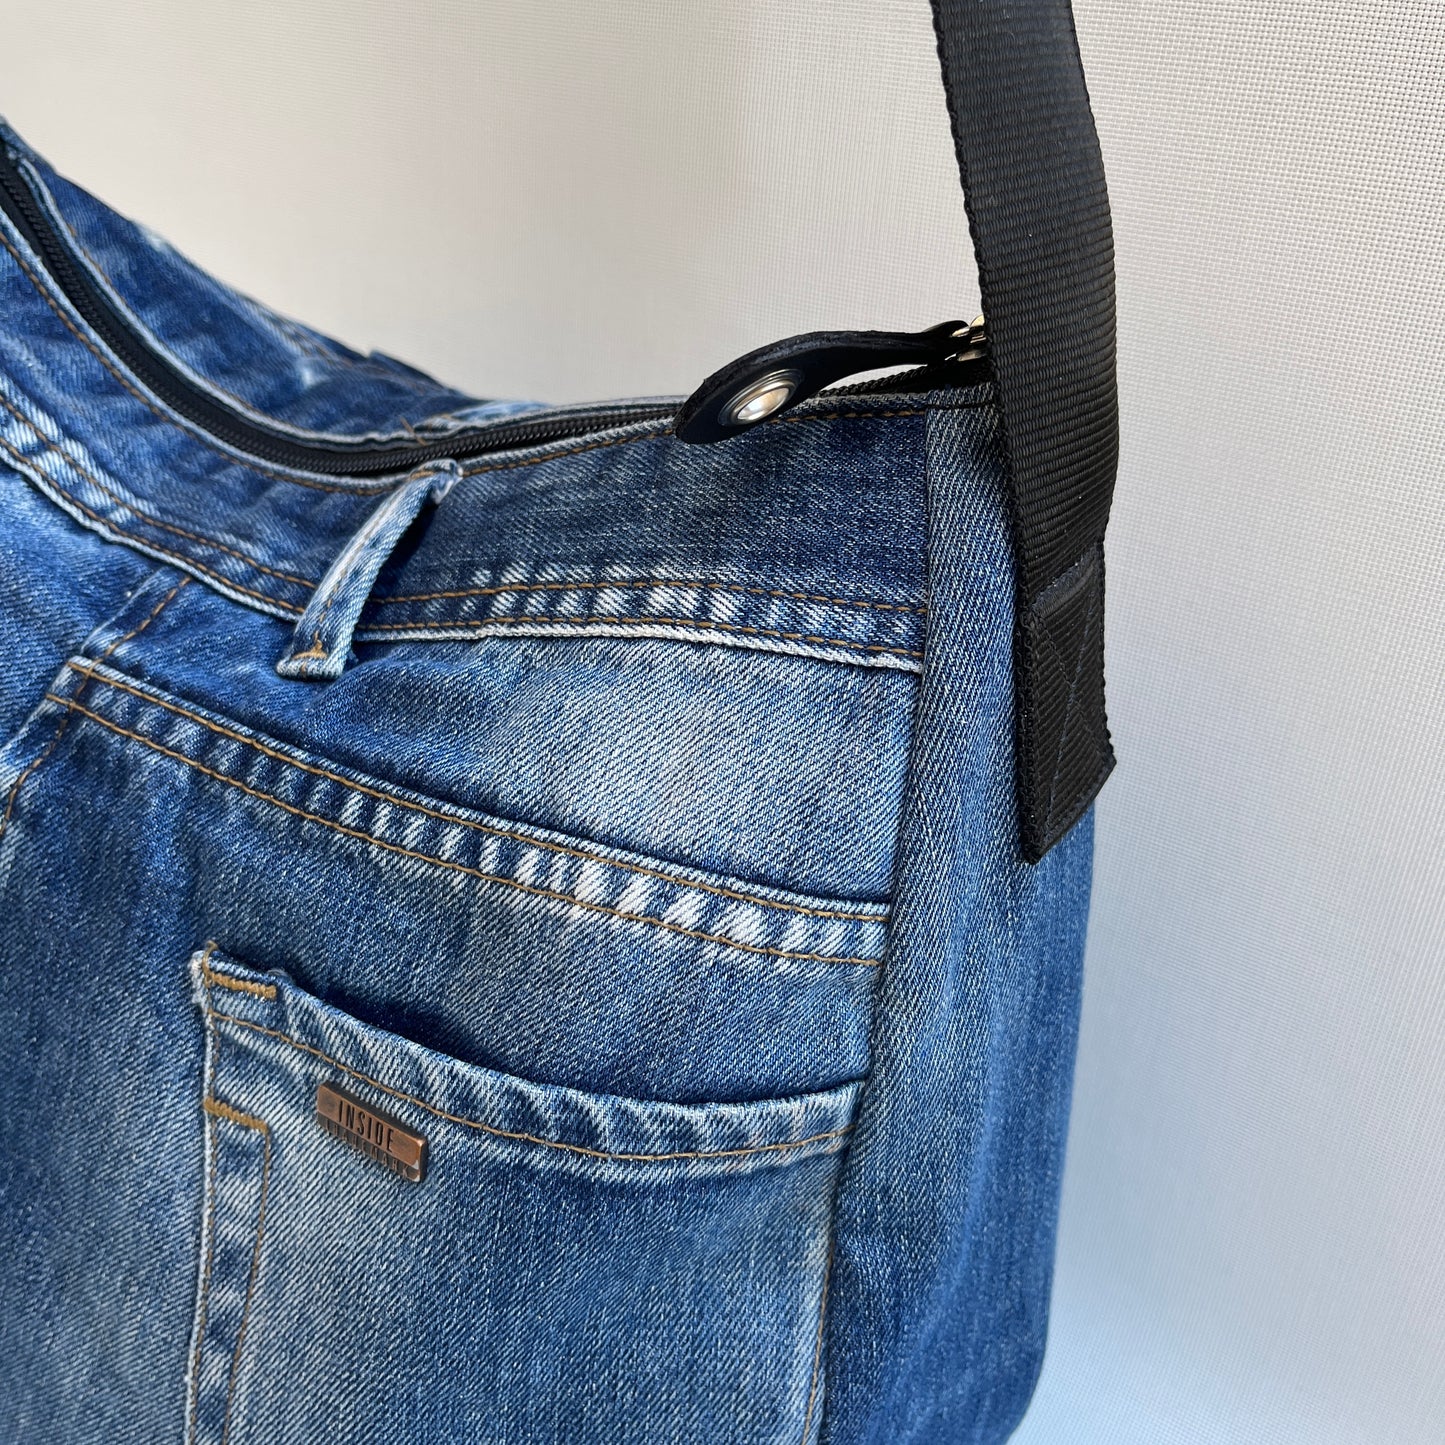 Caomka Tote Bag Special Edition ♻️ Jeans Recycled ♻️ Unikat 11919